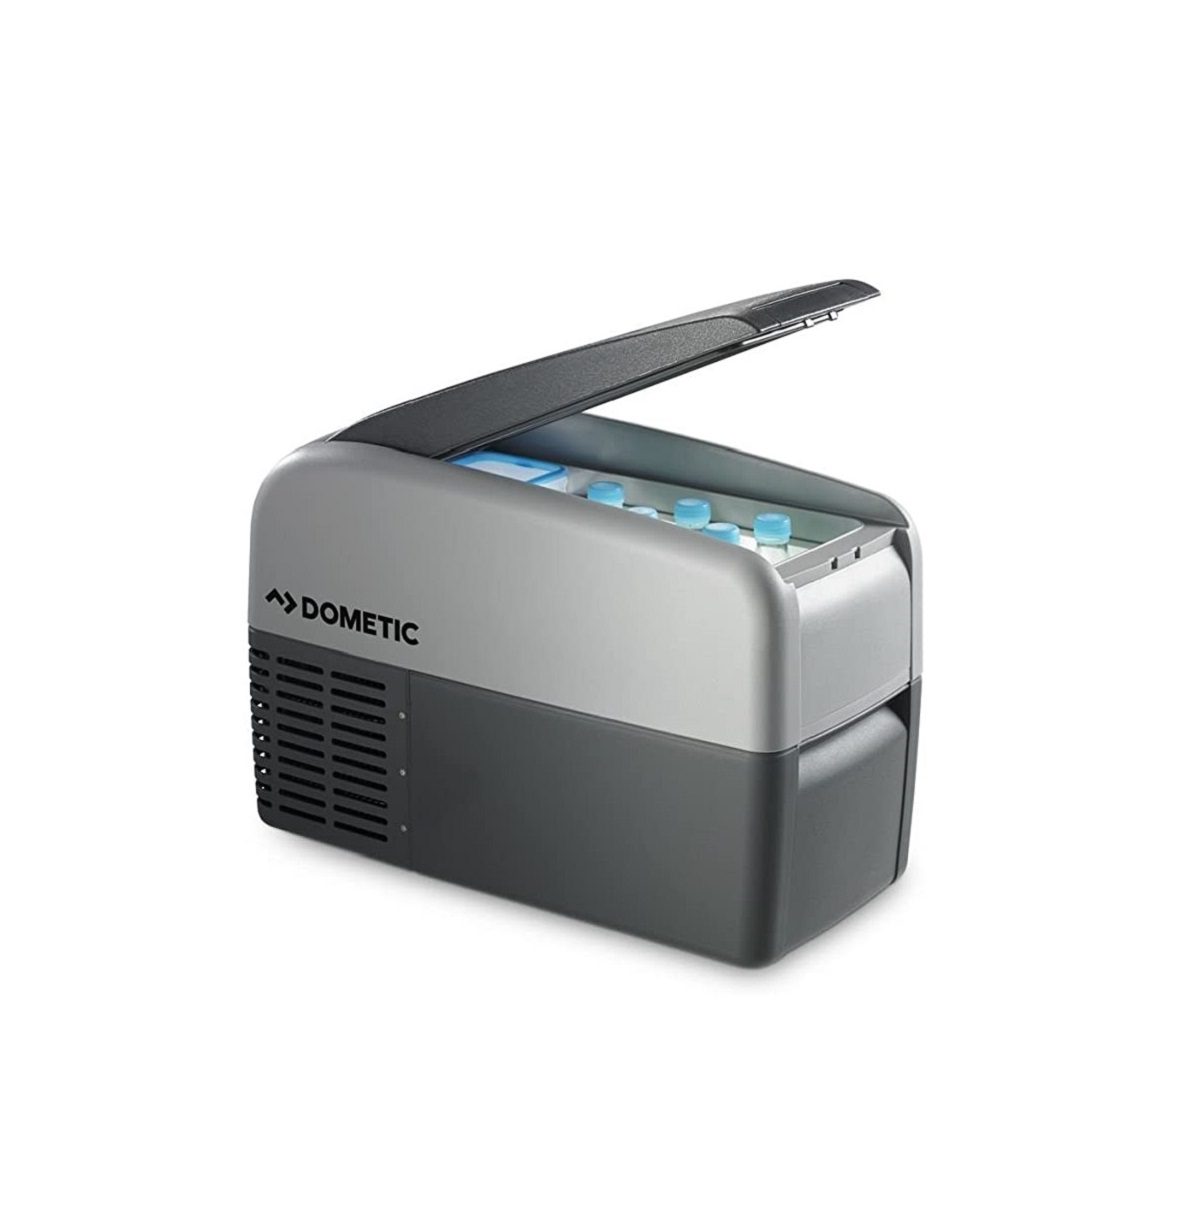 Dometic COOLFREEZE CDF 36 - Portable cooler